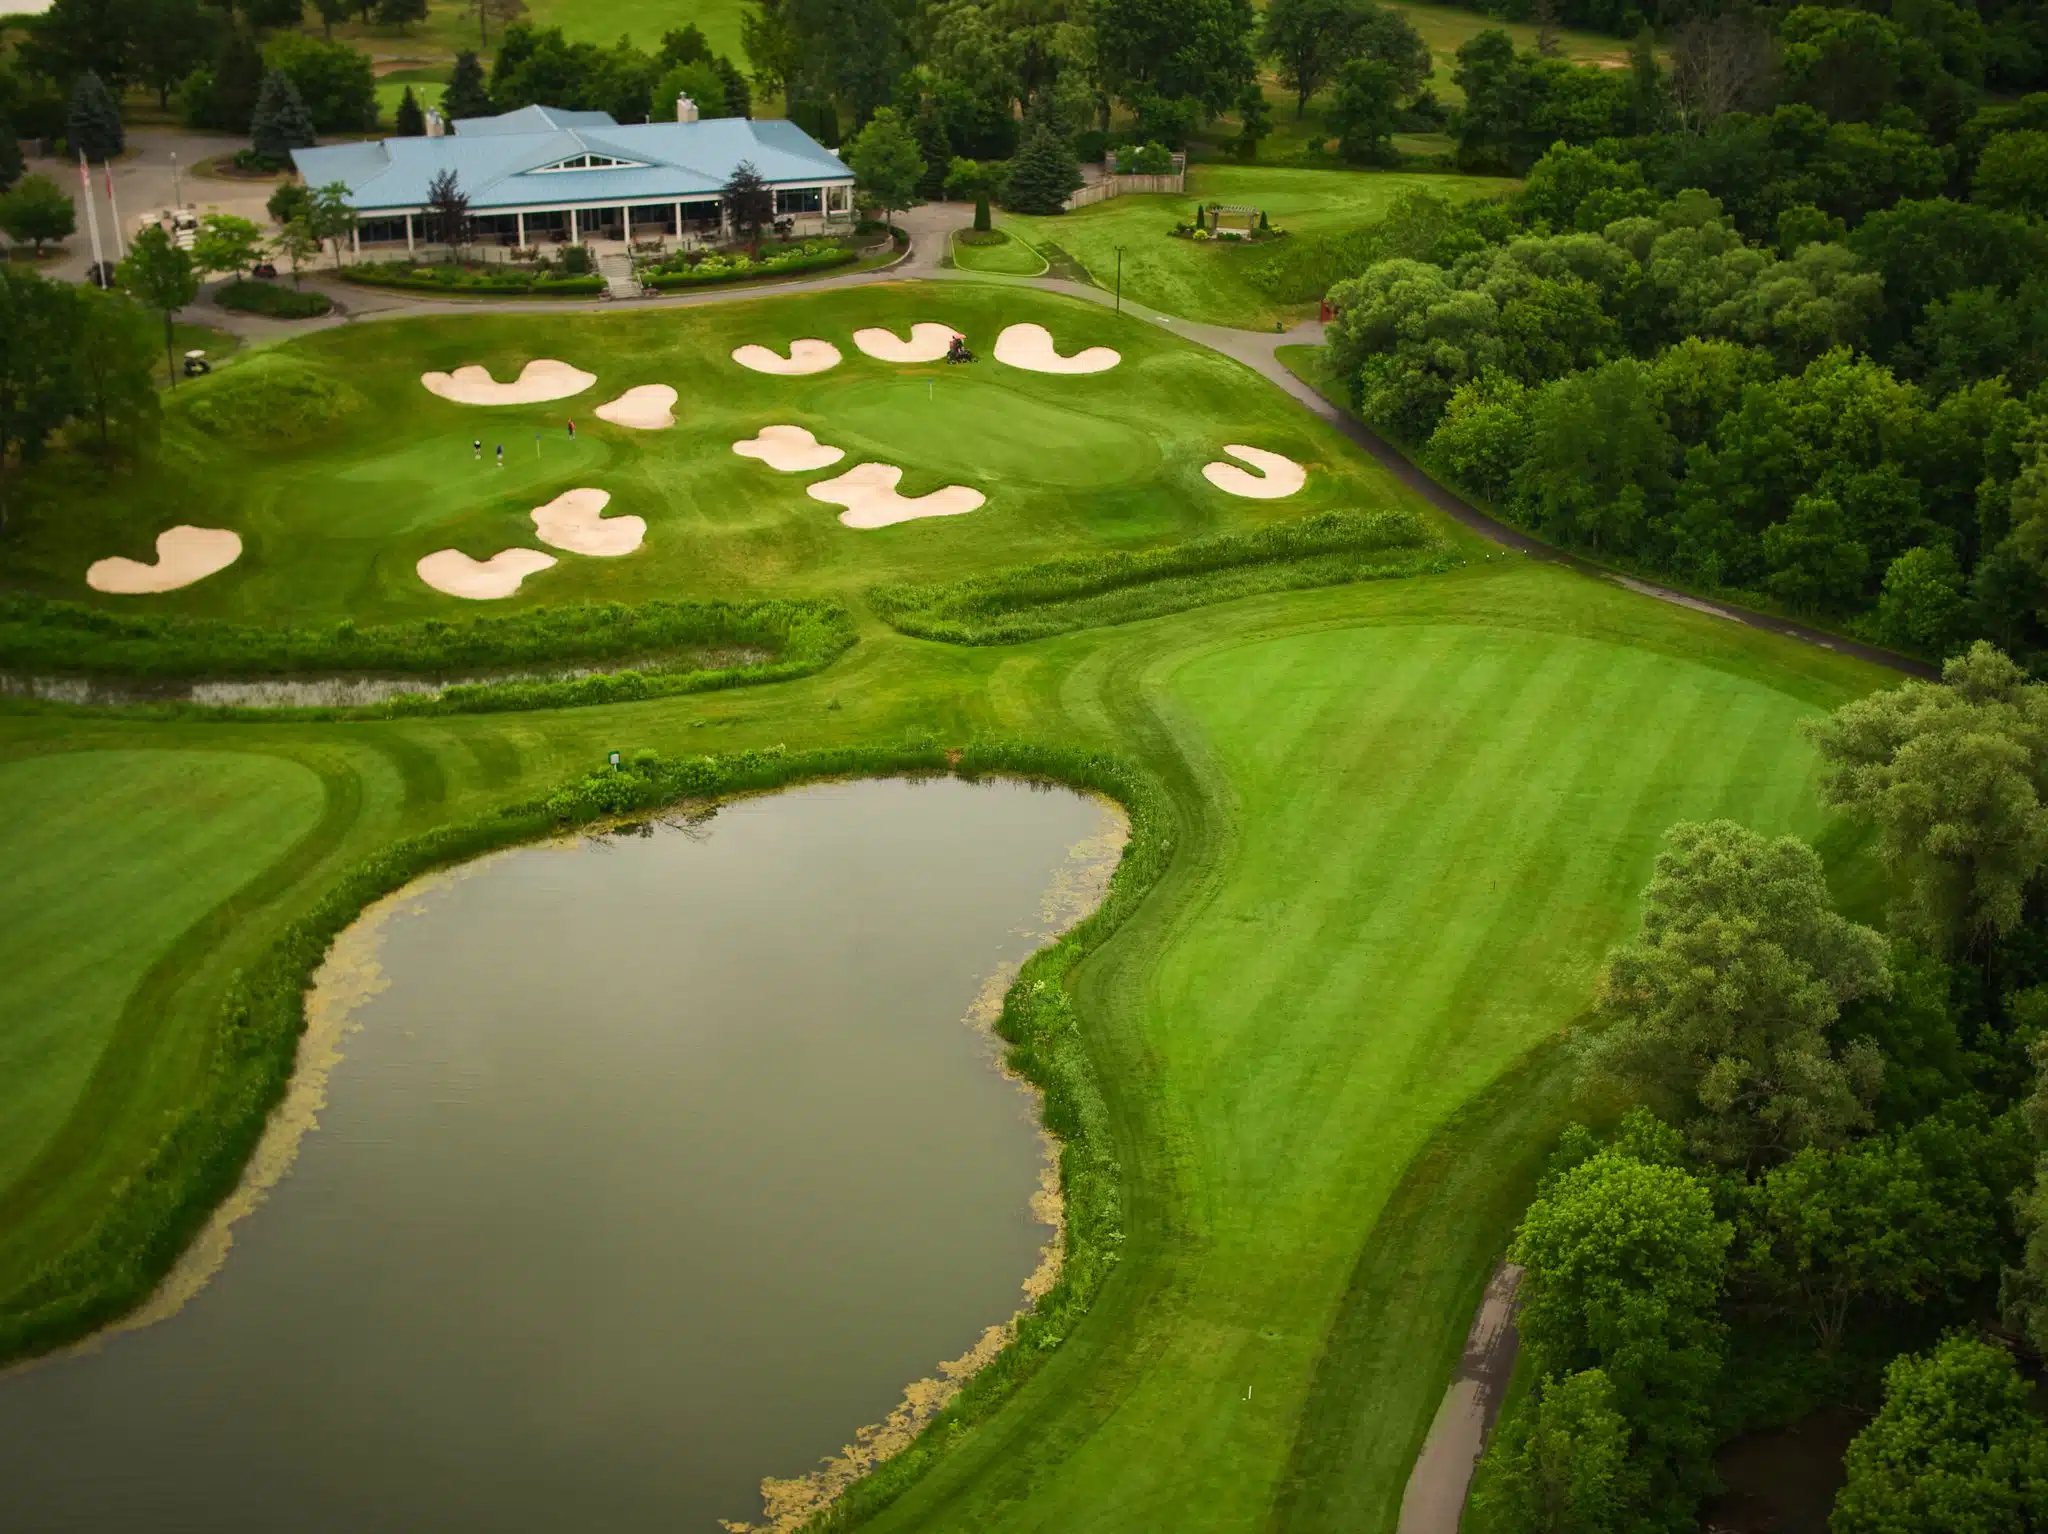 Aerial image of signature holes at royal ontario with clubhouse in background.